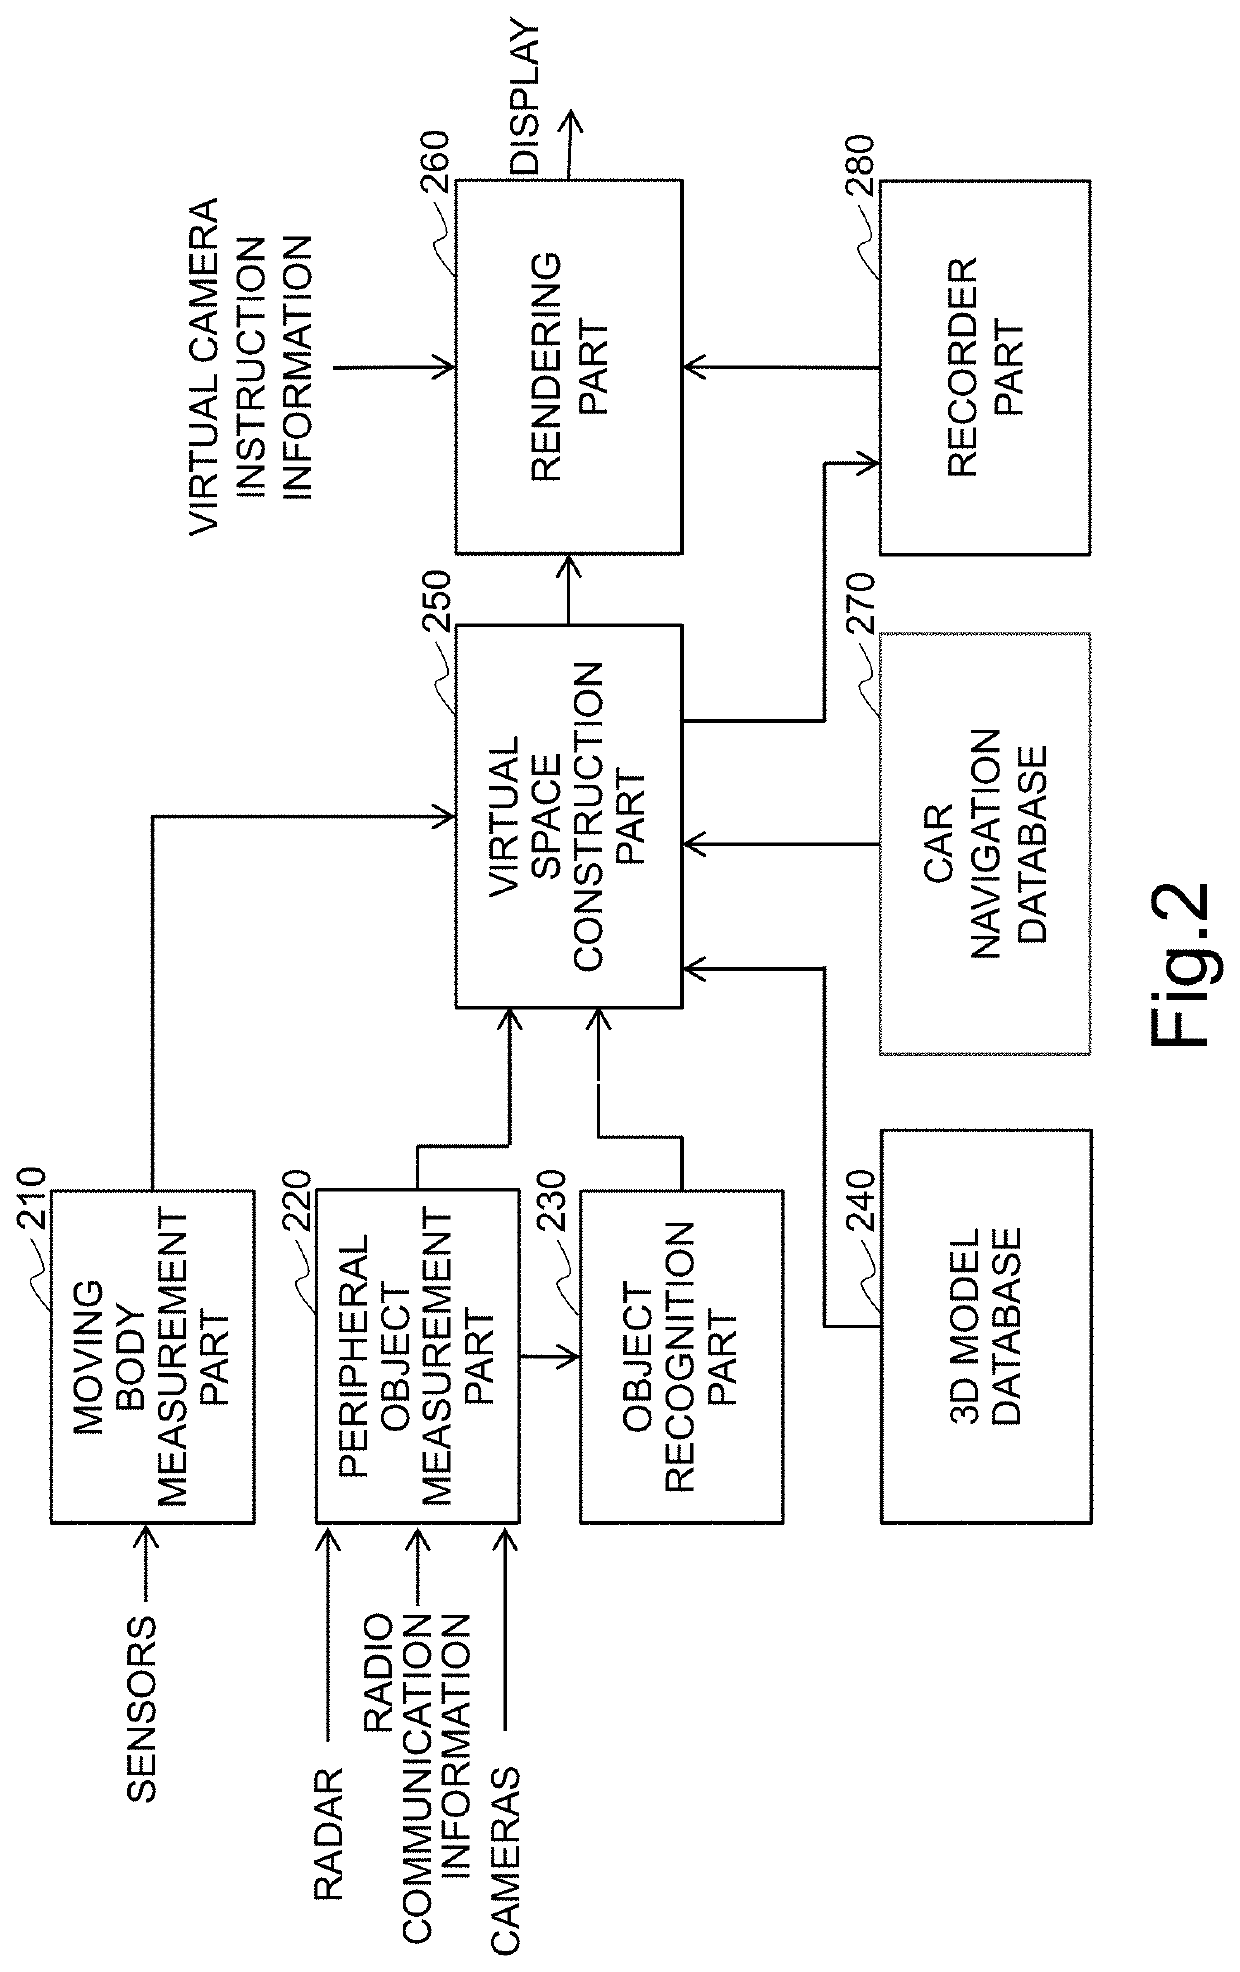 Moving body image generation recording display device and program product